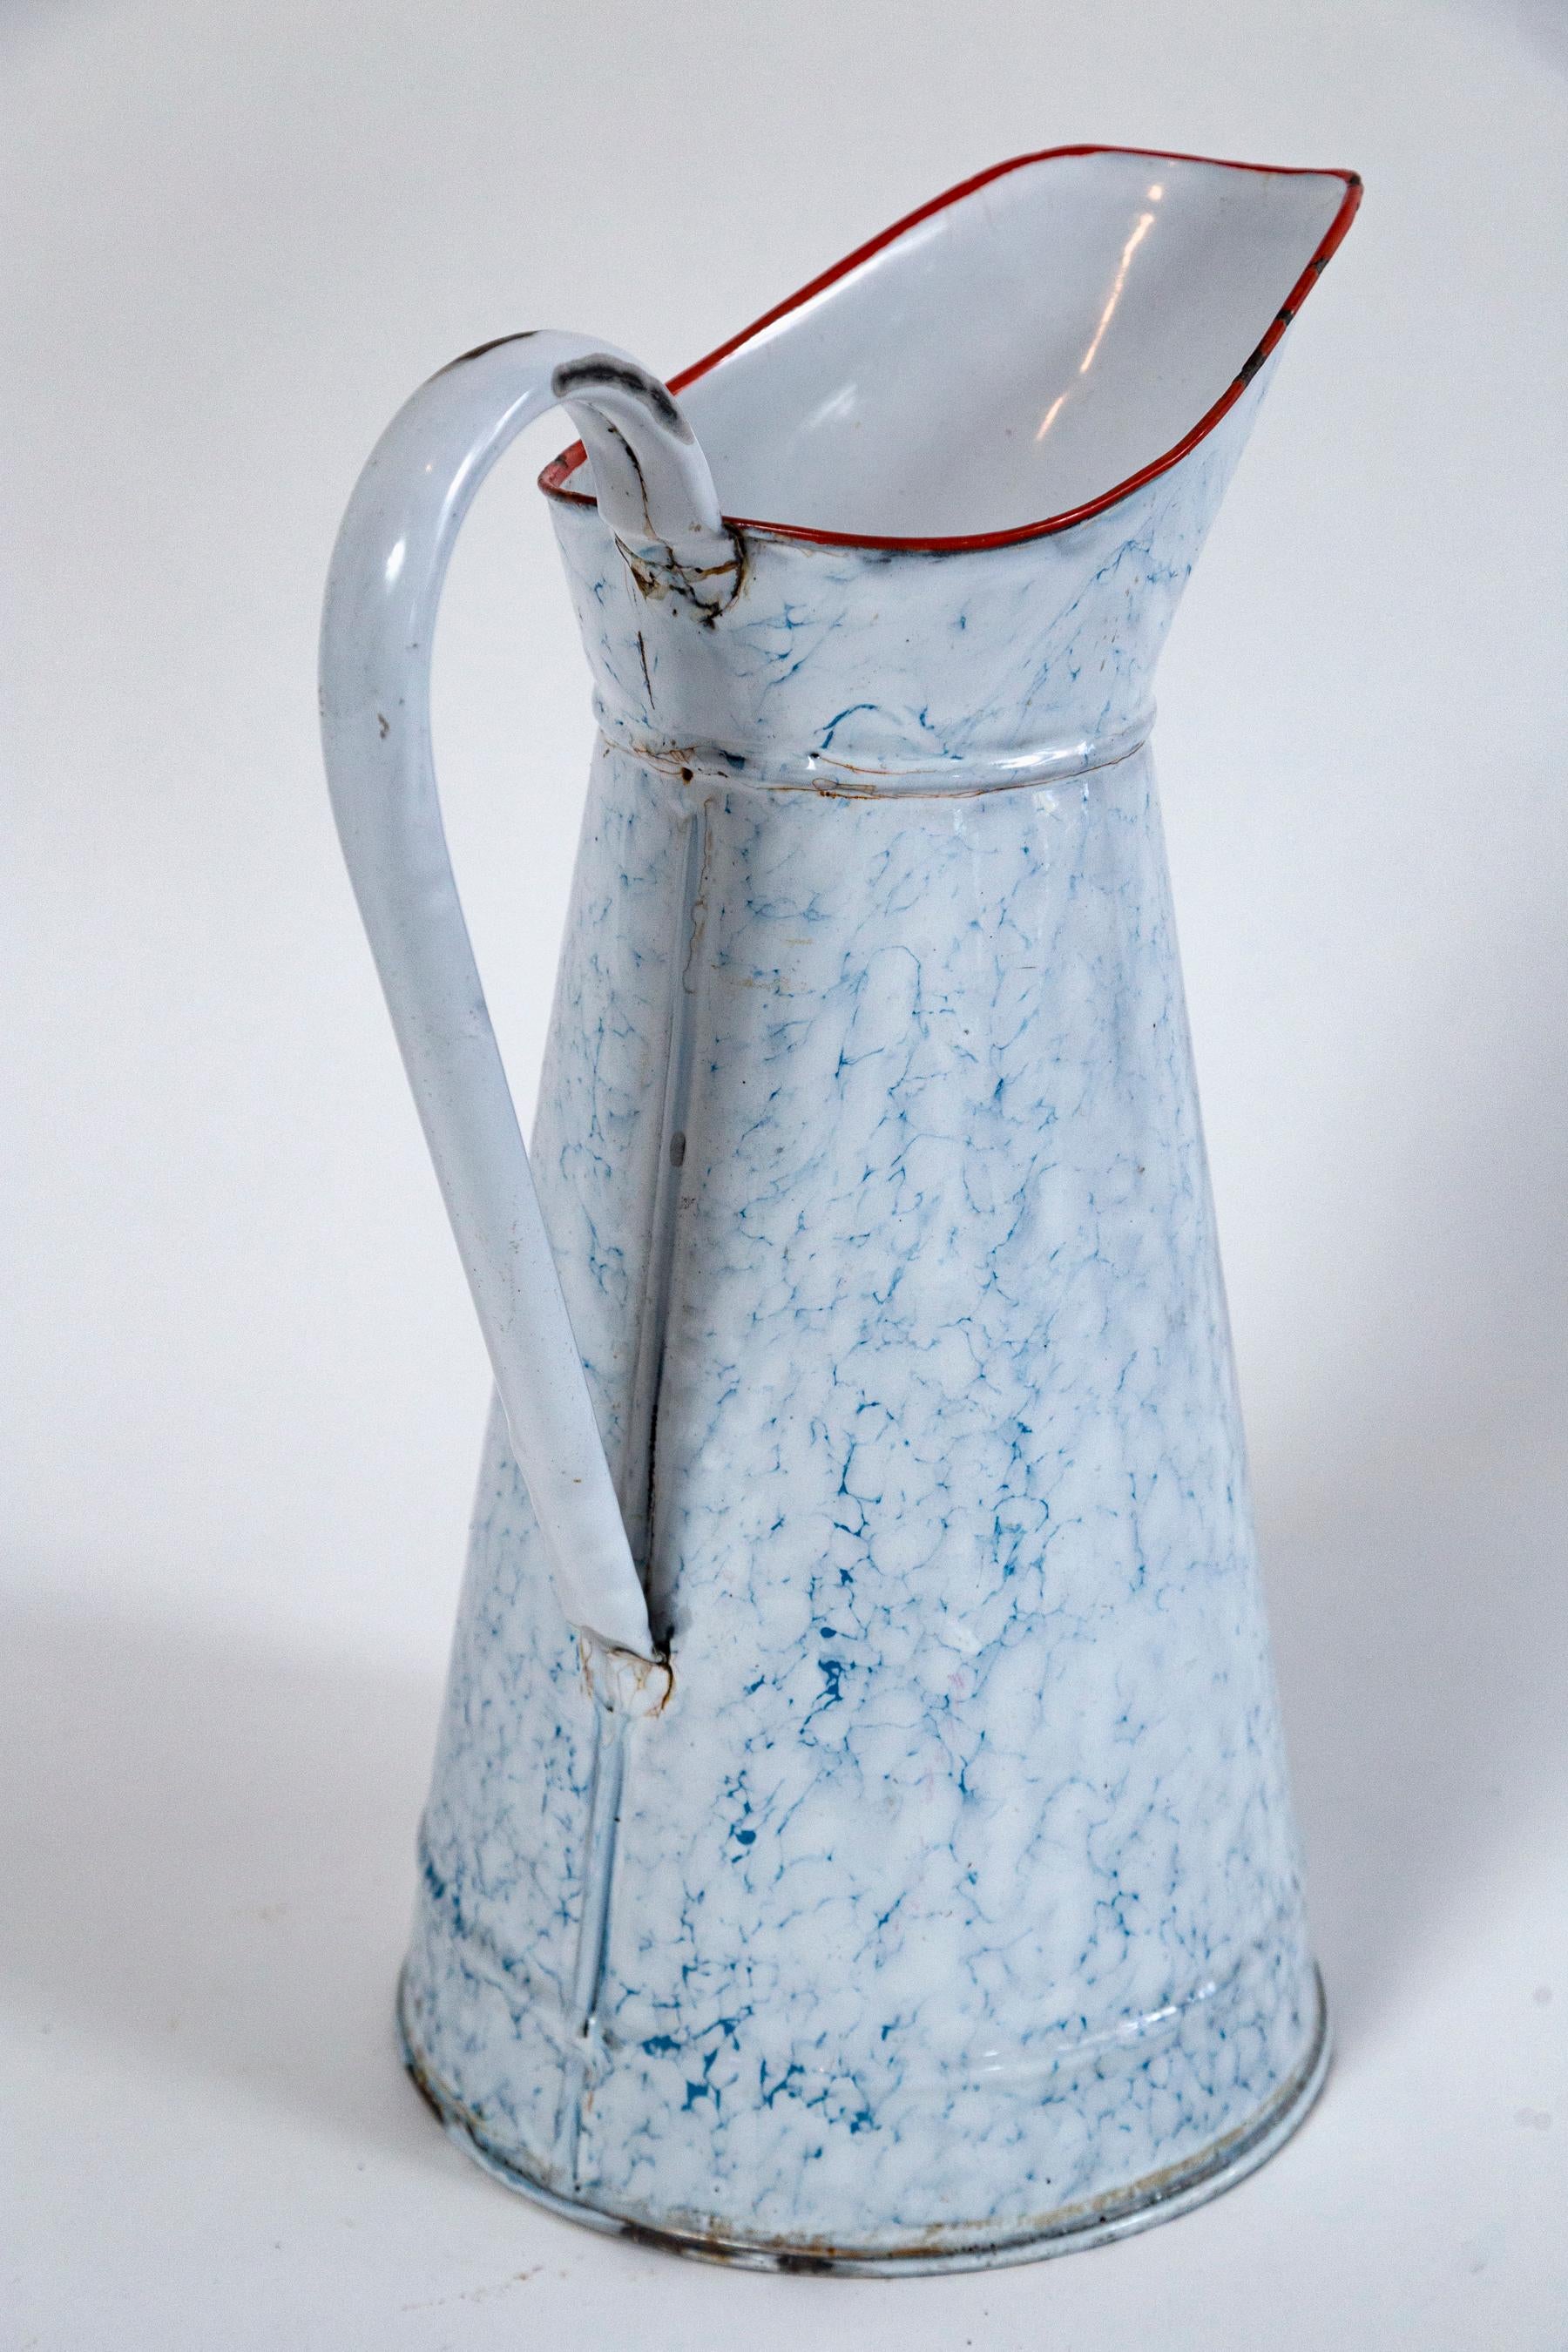 Enameled Vintage French Blue and White Enamelware Pitcher, circa 1920's